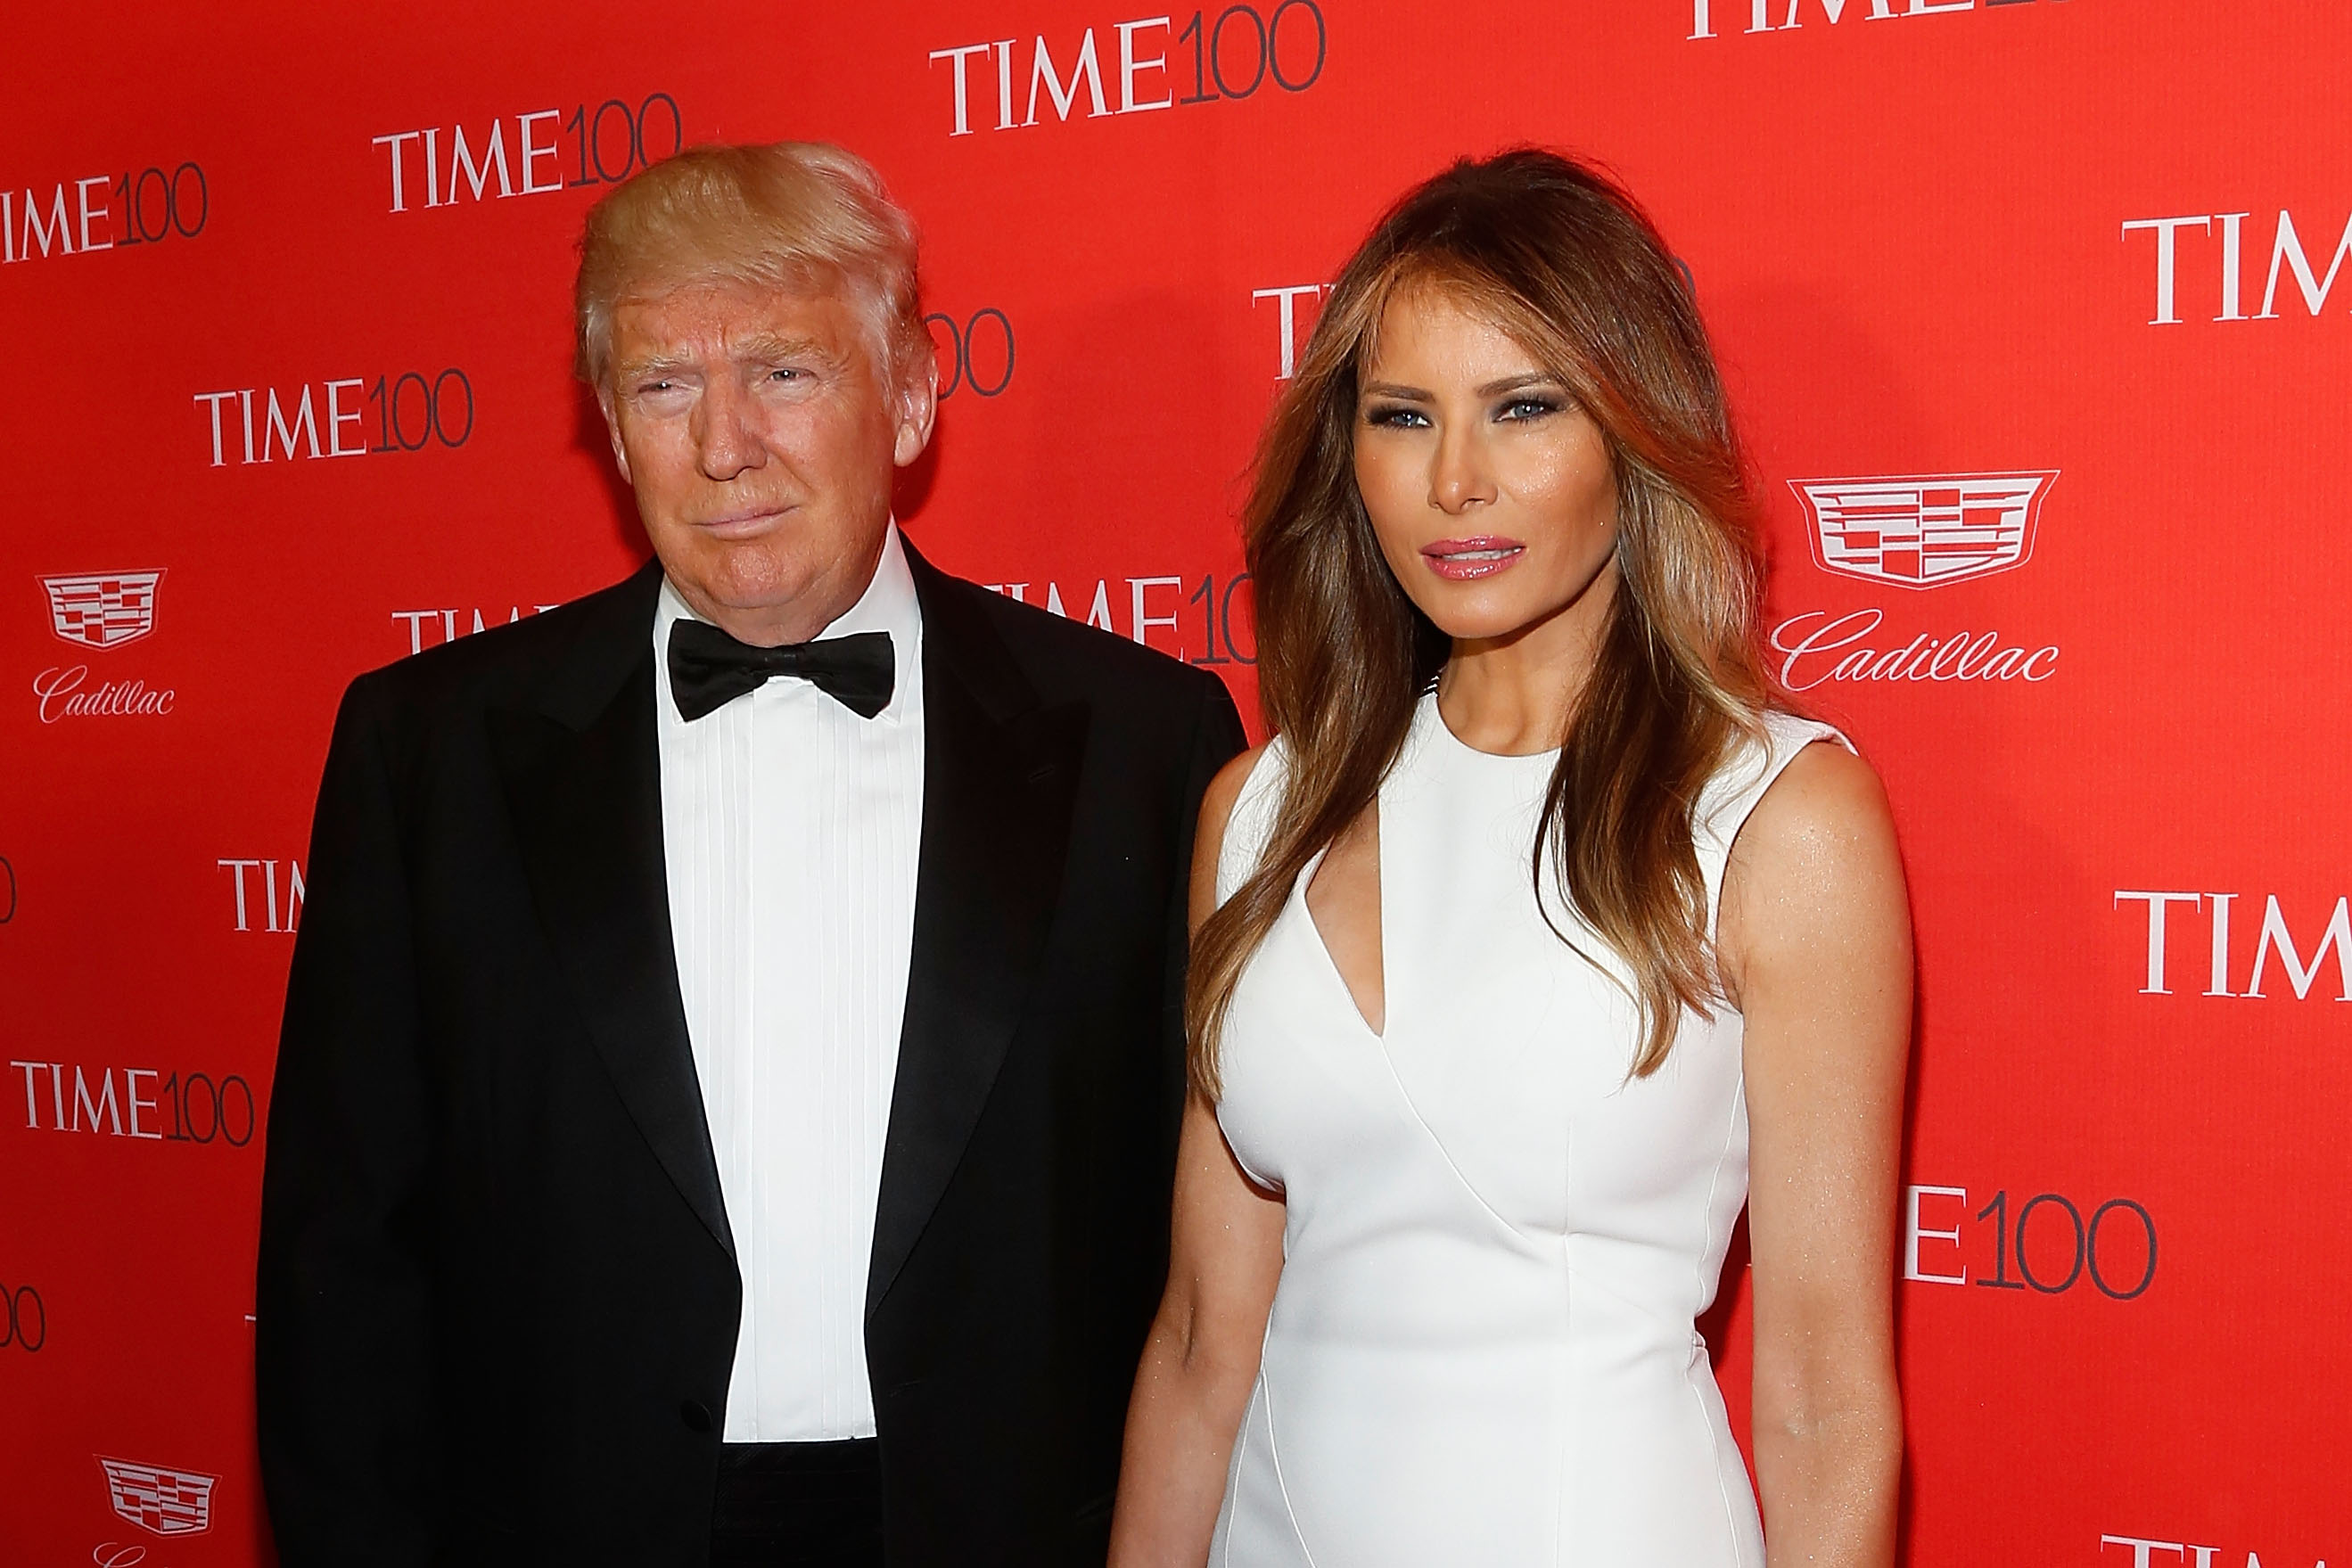 Donald Trump and Melania Trump attend the 2016 Time 100 Gala at Frederick P. Rose Hall, Jazz at Lincoln Center on April 26, 2016 in New York City. (Taylor Hill—FilmMagic/Getty Images)